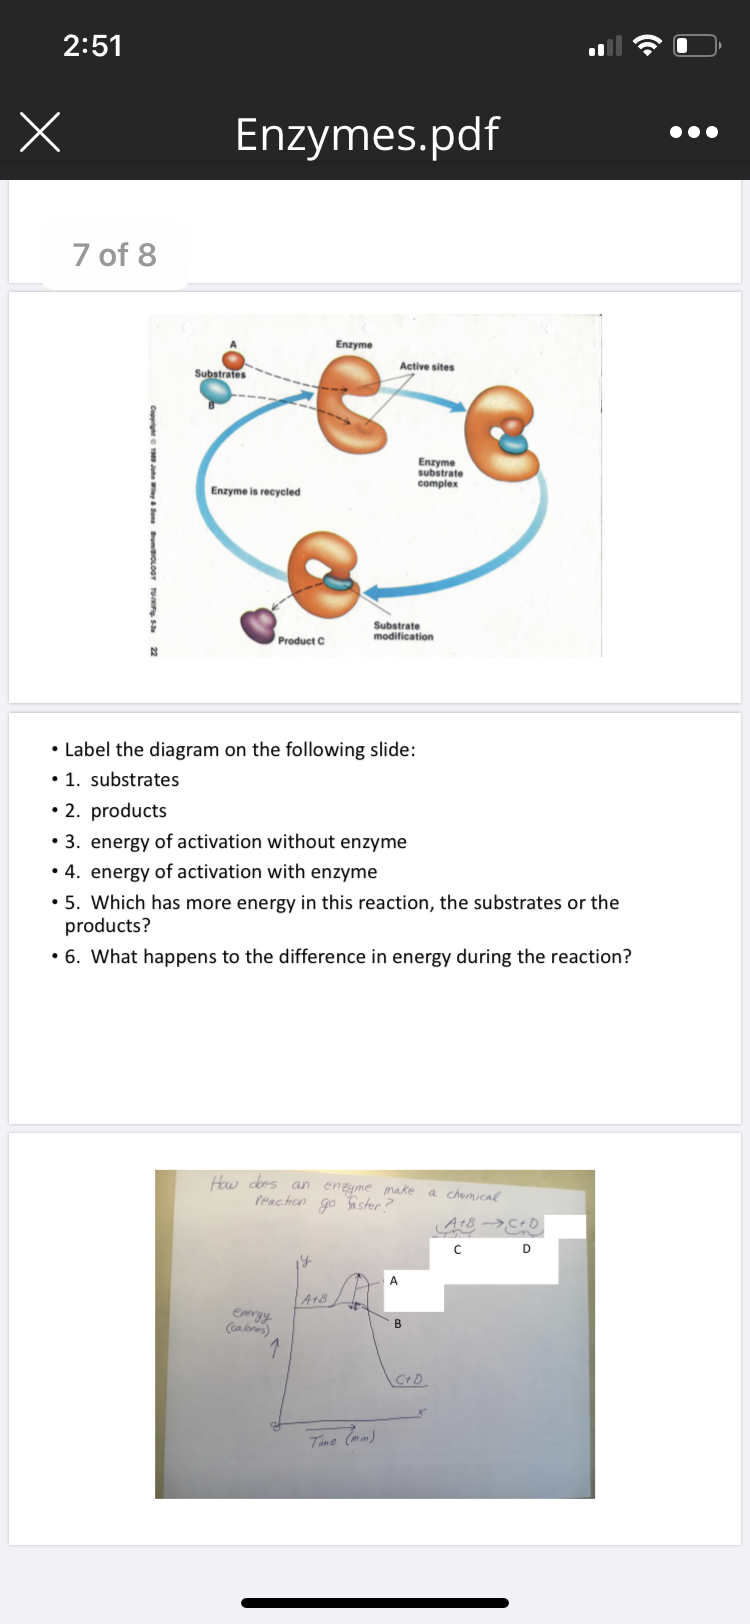 2:51
Enzymes.pdf
7 of 8
Enzyme
Active sites
Substrates
Enzyme
substrate
complex
Enzyme is recycled
Substrate
modification
Product C
• Label the diagram on the following slide:
• 1. substrates
• 2. products
• 3. energy of activation without enzyme
• 4. energy of activation with enzyme
• 5. Which has more energy in this reaction, the substrates or the
products?
• 6. What happens to the difference in energy during the reaction?
How dees an enzyme make
reaction go ster?
a chemical
A+B
evergy
Time (mim)
Copyrighte T Jhe eya Son uaOLOGr TU S 22
